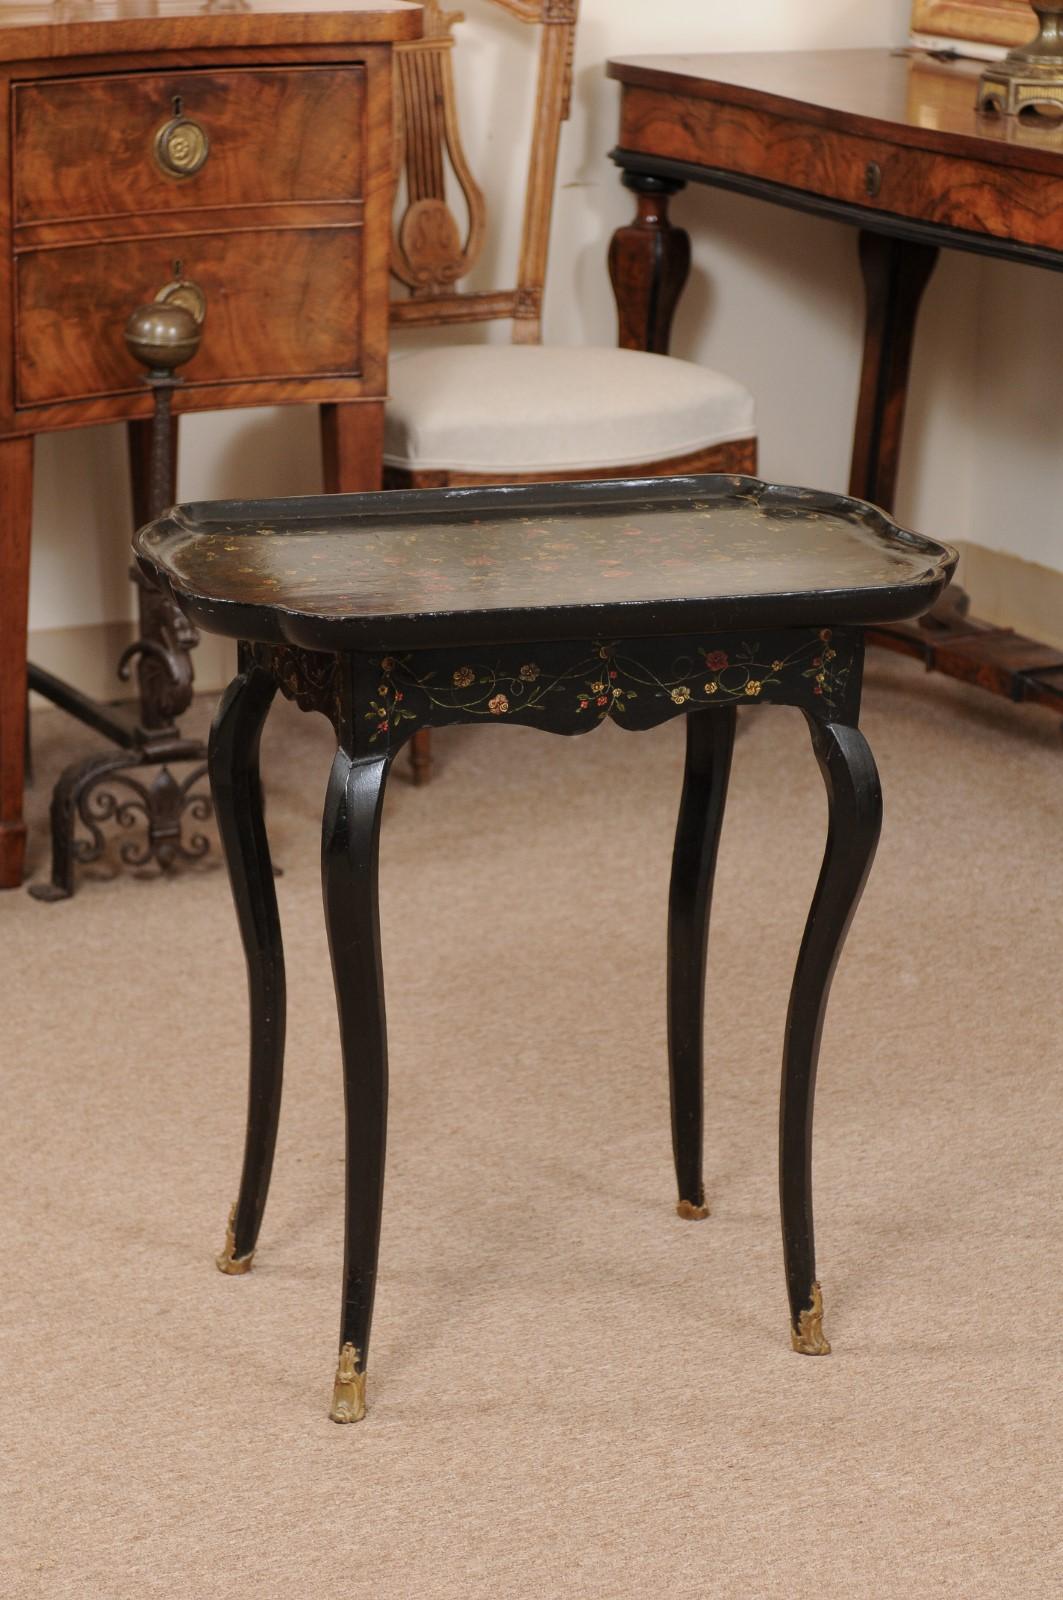 Mid-18th Century French Black Lacquered Louis XV Tray Top Table with Floral Decoration & Bronze Mounted Hoof Feet
